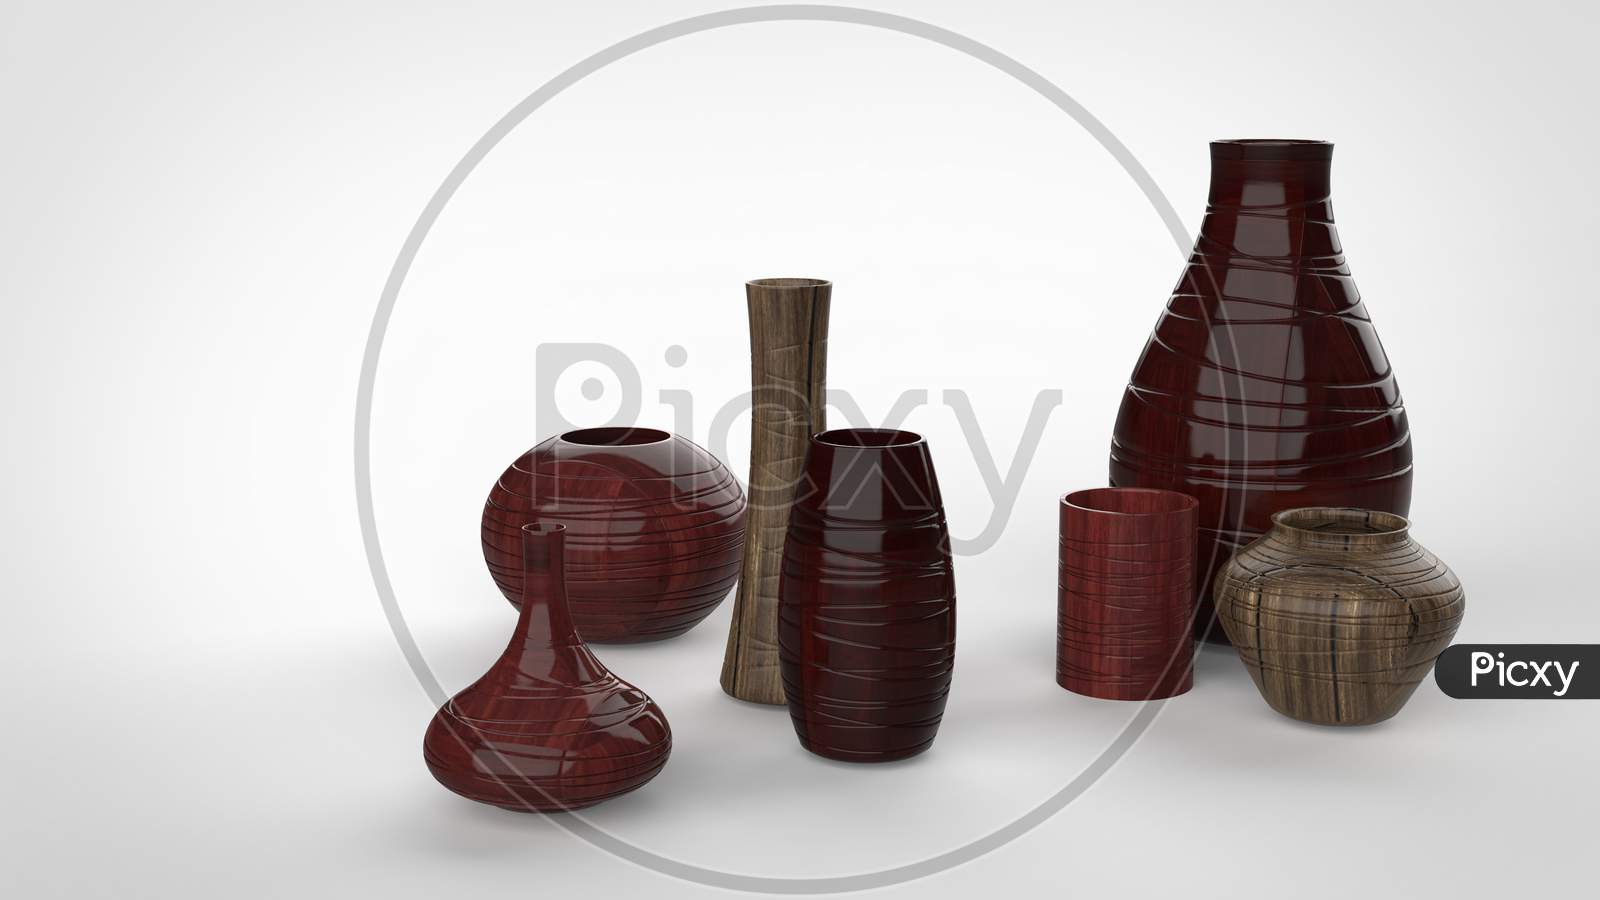 3D Render Of Different Shaped Glossy Polished Wooden Material Flower Vases In White Background With Space For Text